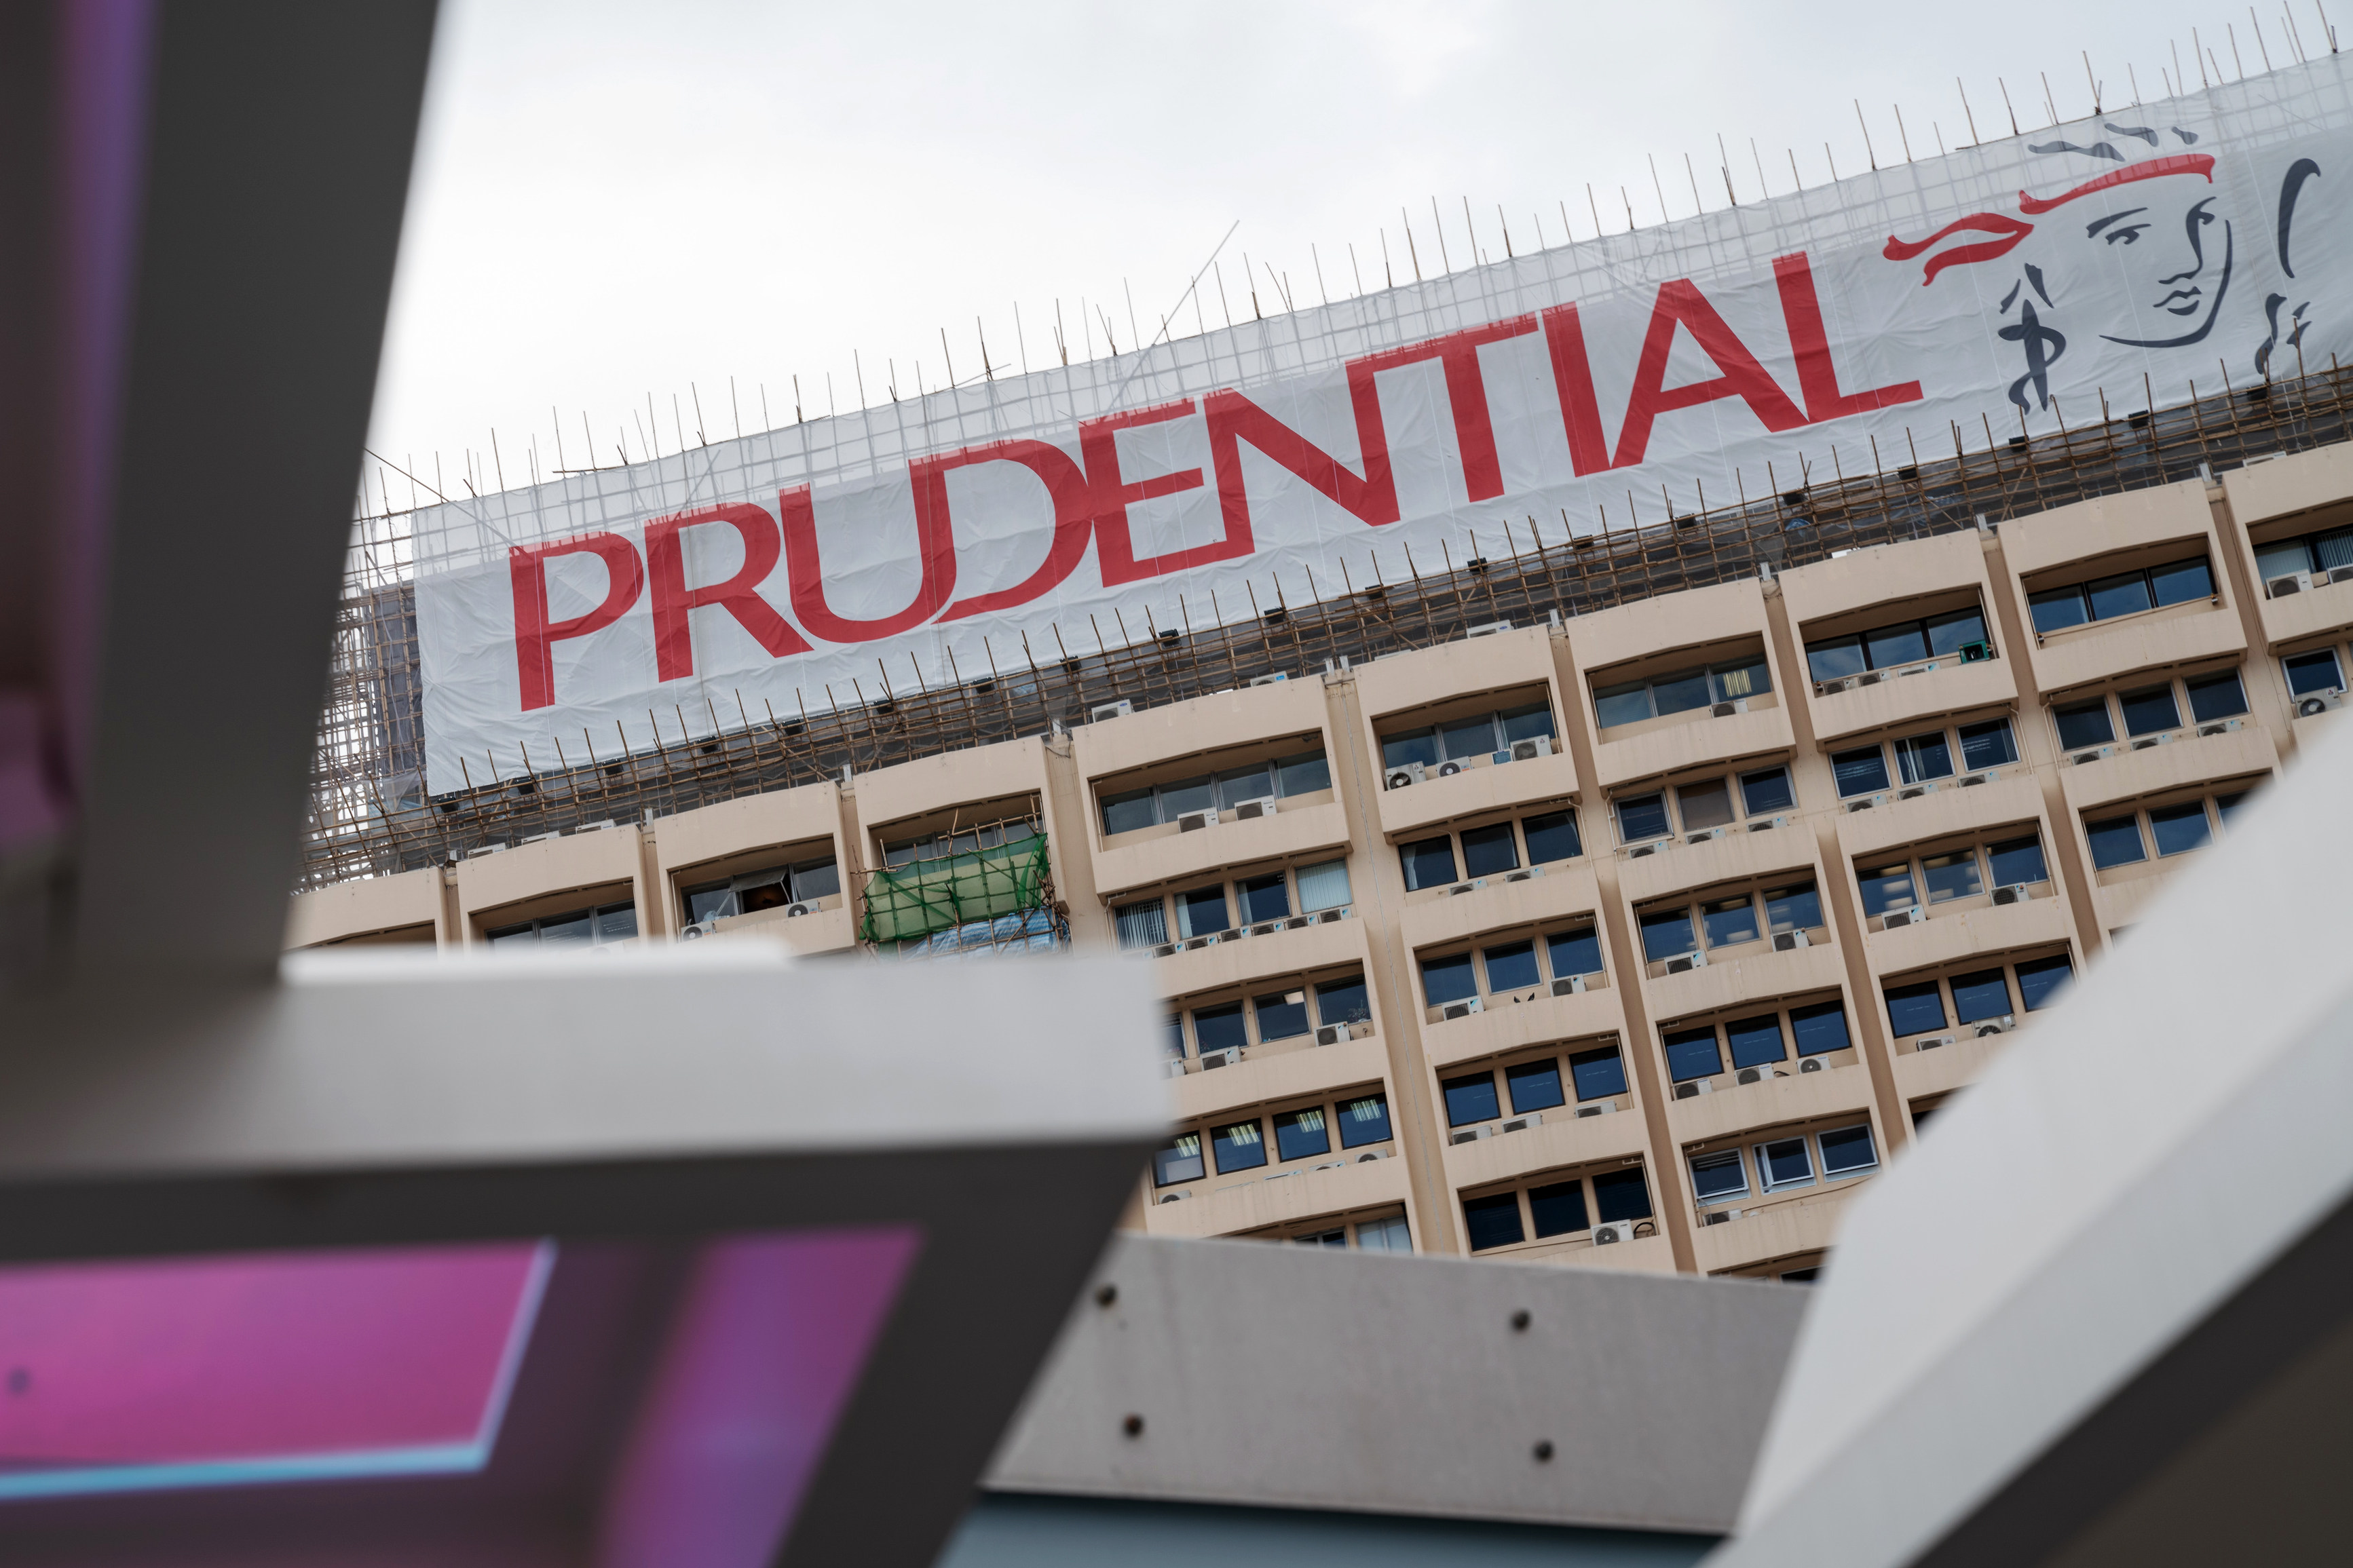 A banner featuring the Prudential logo is displayed atop a building in Hong Kong. Photo: Bloomberg